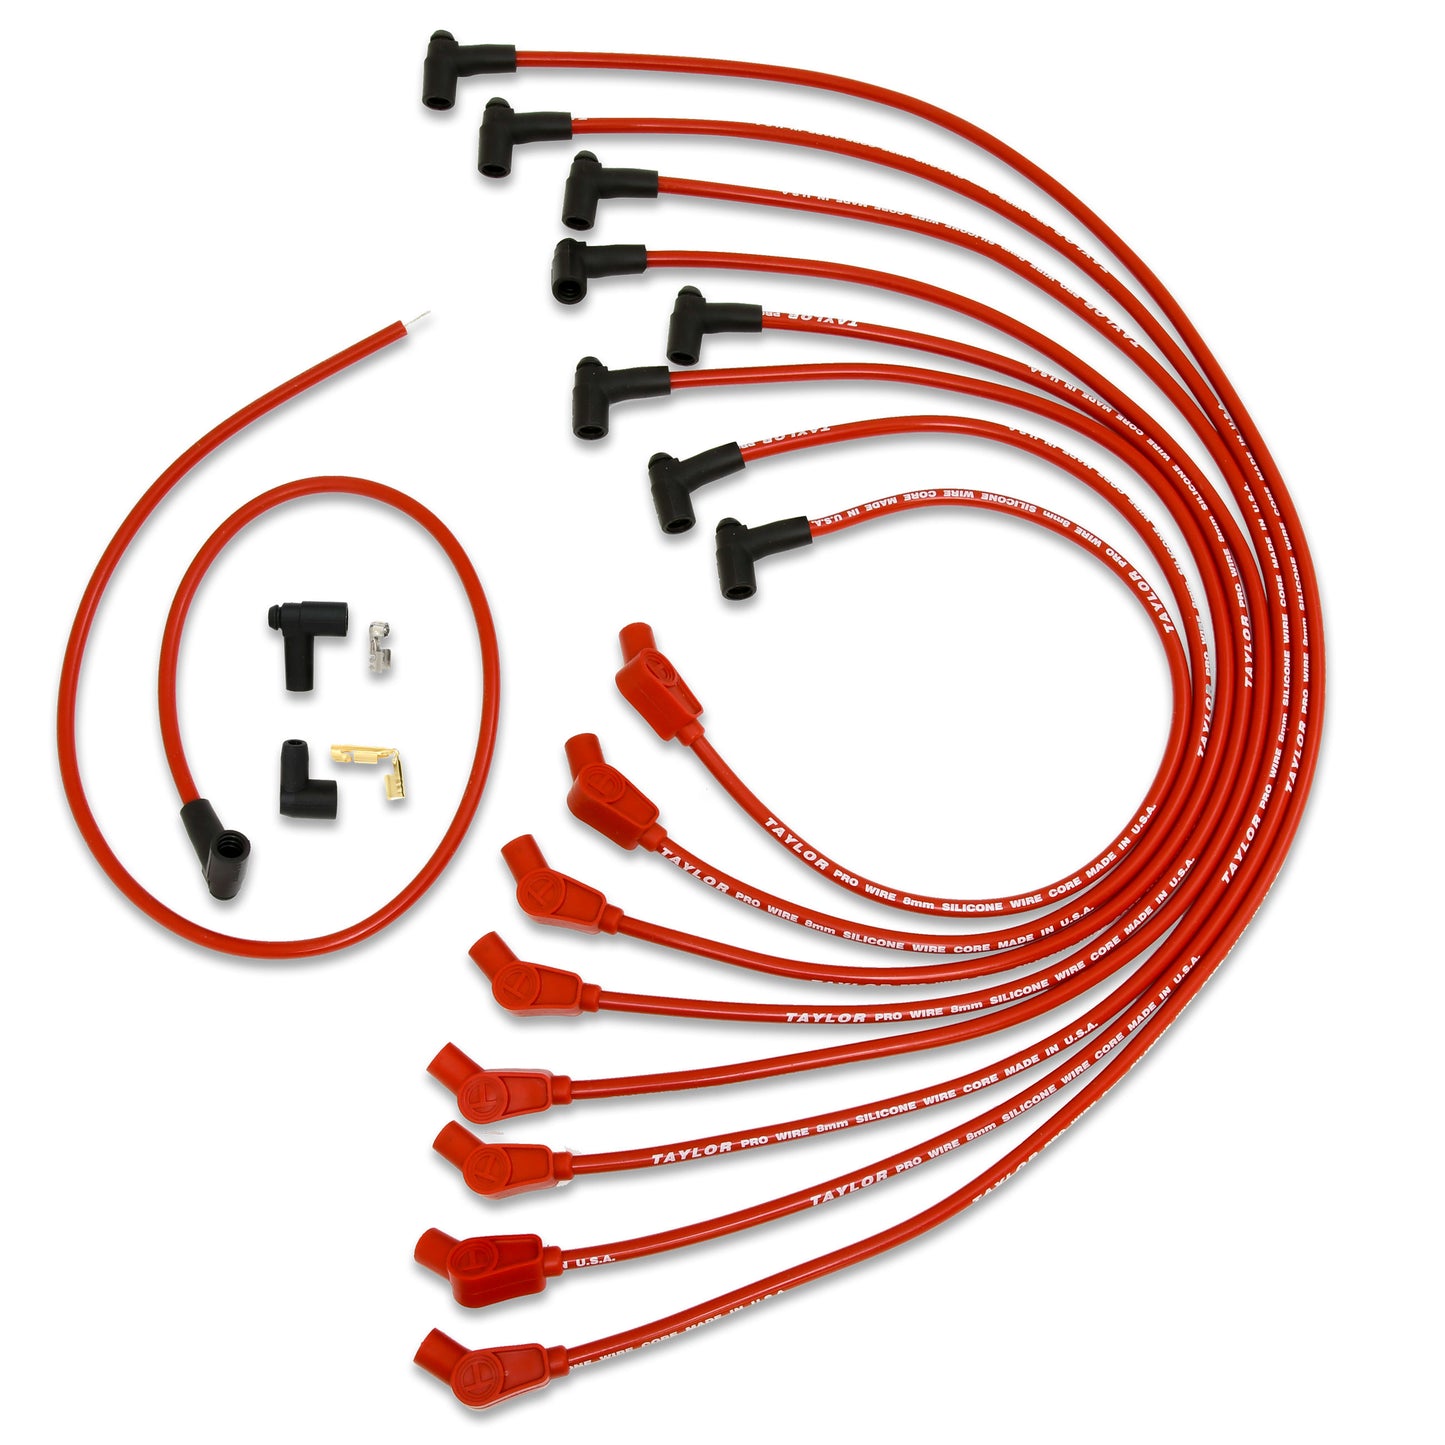 Taylor Cable 79231 10.4mm 409 Spiro Pro Race Fit Spark Plug Wires 135° Red